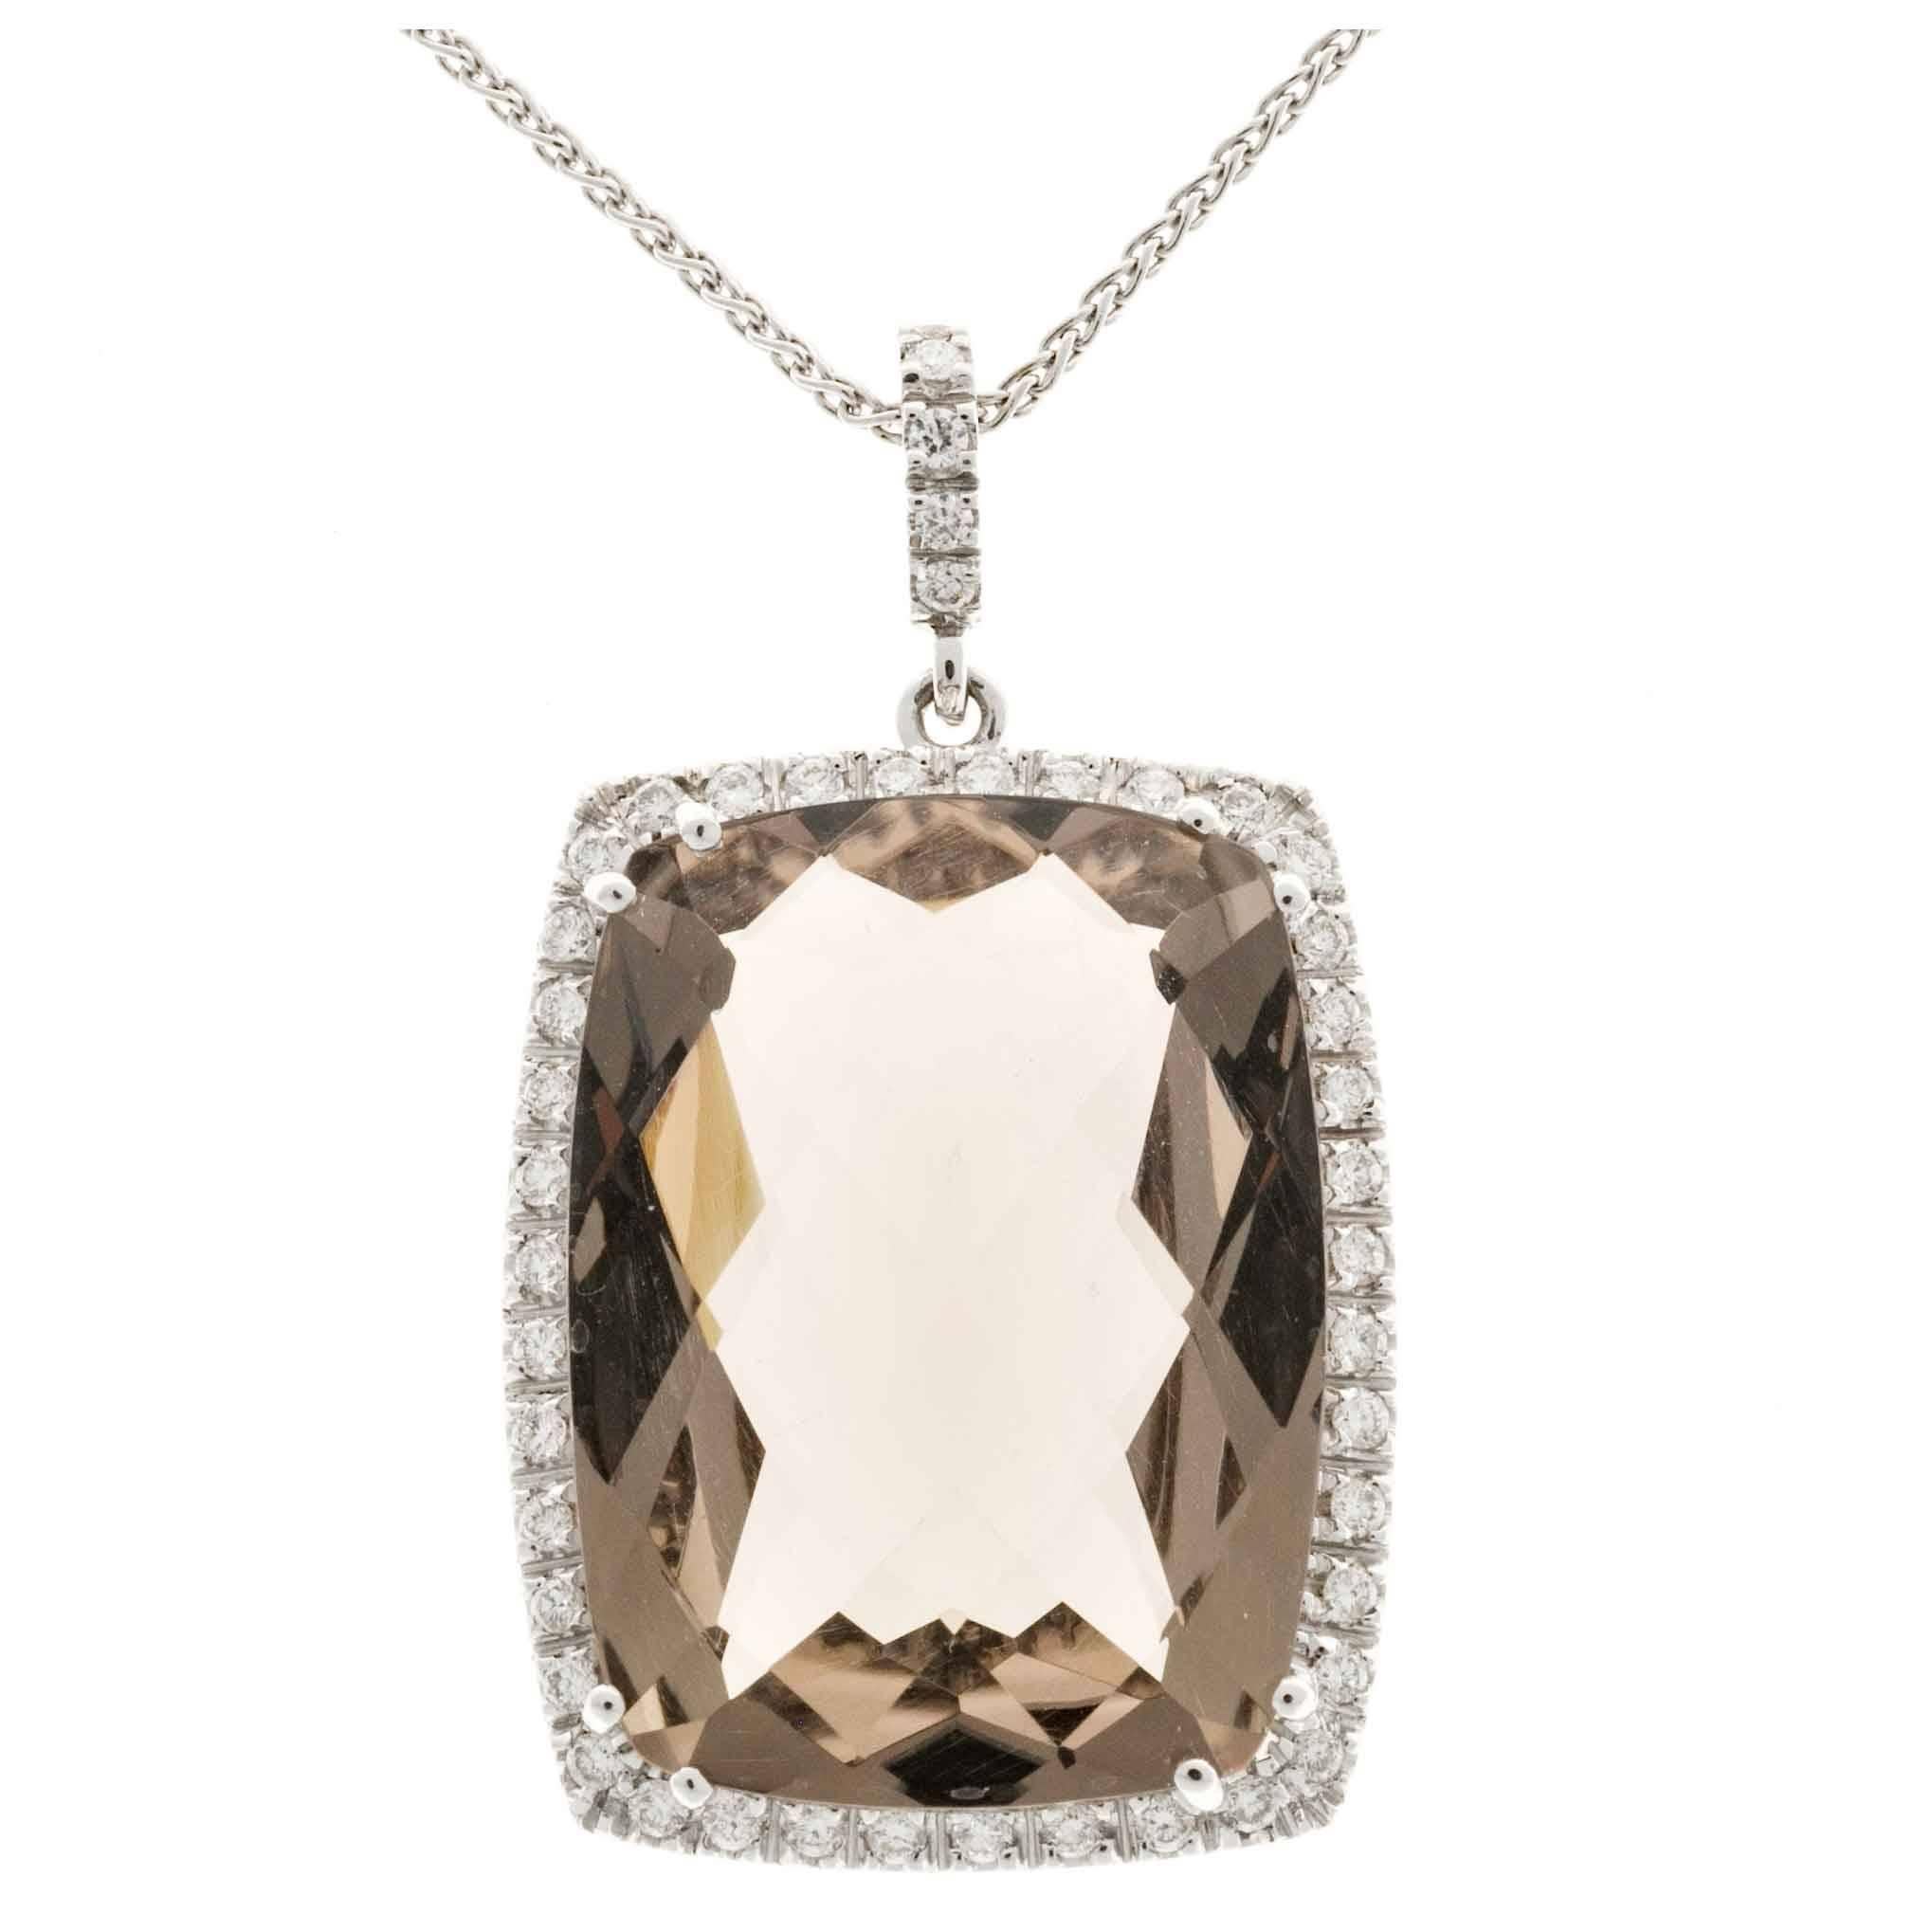 Smoky quartz diamond pendant necklace. 24.00ct cushion cut quartz with a halo of 46 round cut diamonds. 16 inch white gold wheat chain.

1 cushion smoky Quartz, approx. total weight 24.00cts, natural color
46 round diamonds, approx. total weight